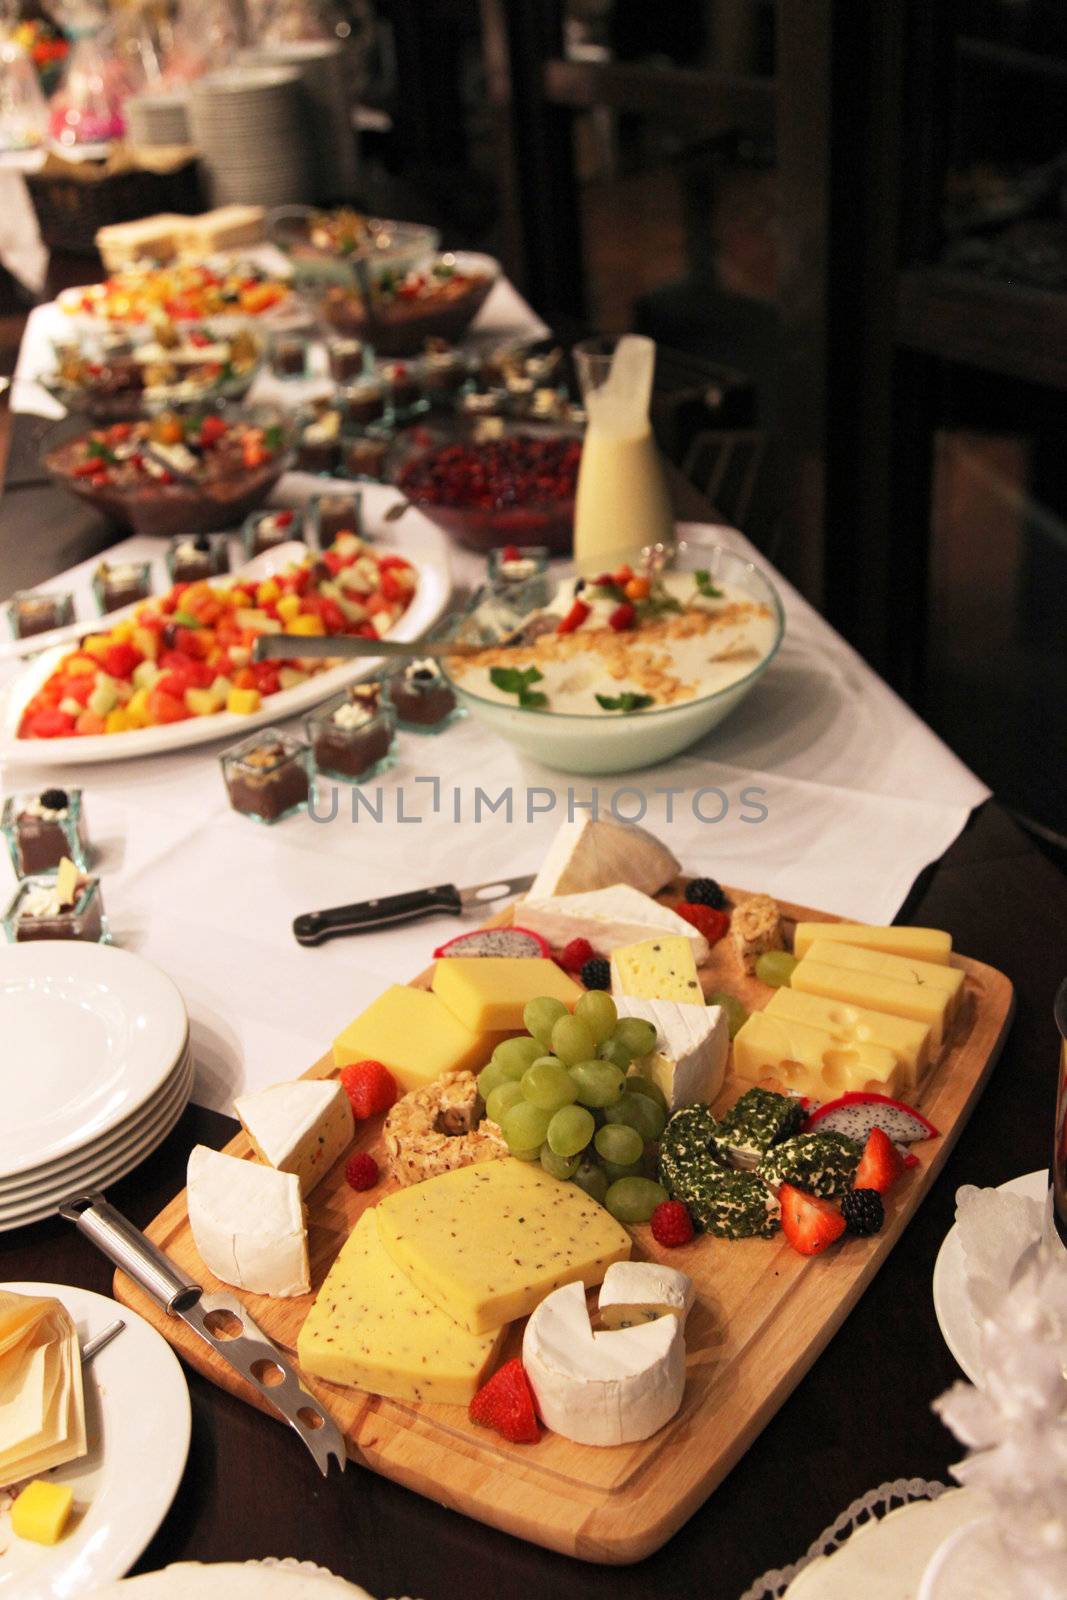 Cheese platter with an assortment of gourmet cheeses displayed on a buffet table at a catered event or function in a restaurant or venue